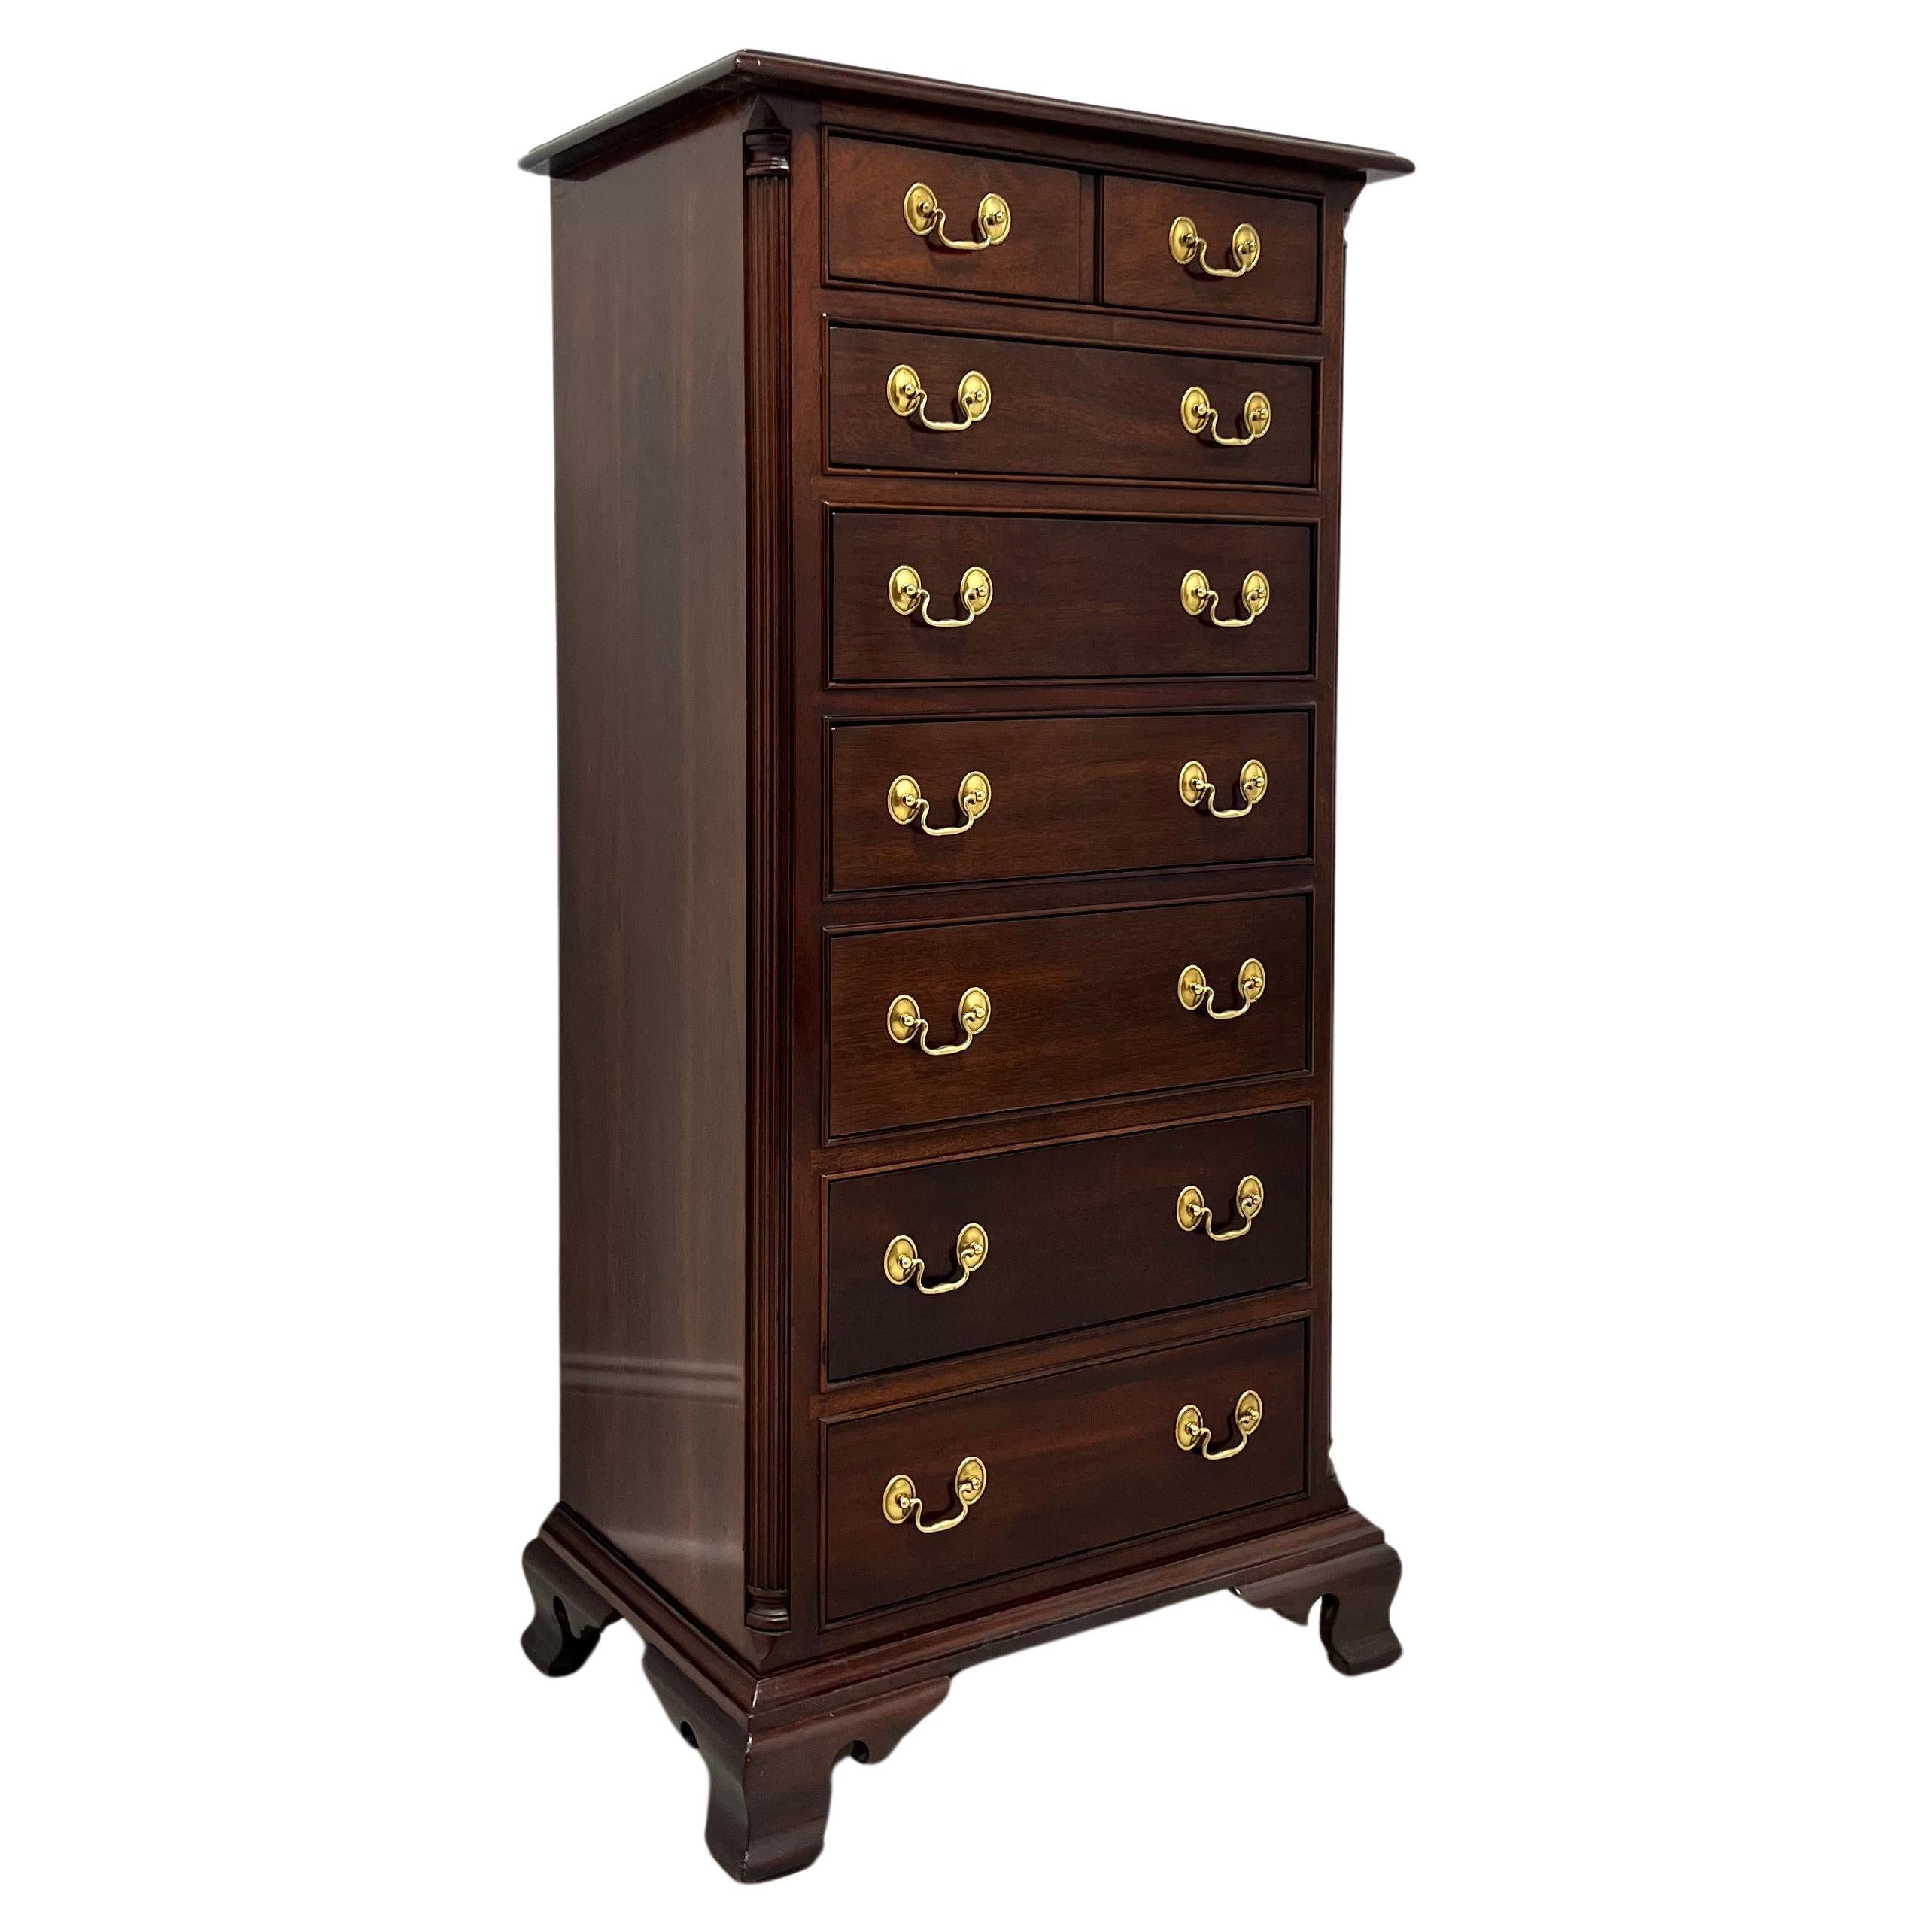 STICKLEY Mahogany Chippendale Semainier Lingerie Chest